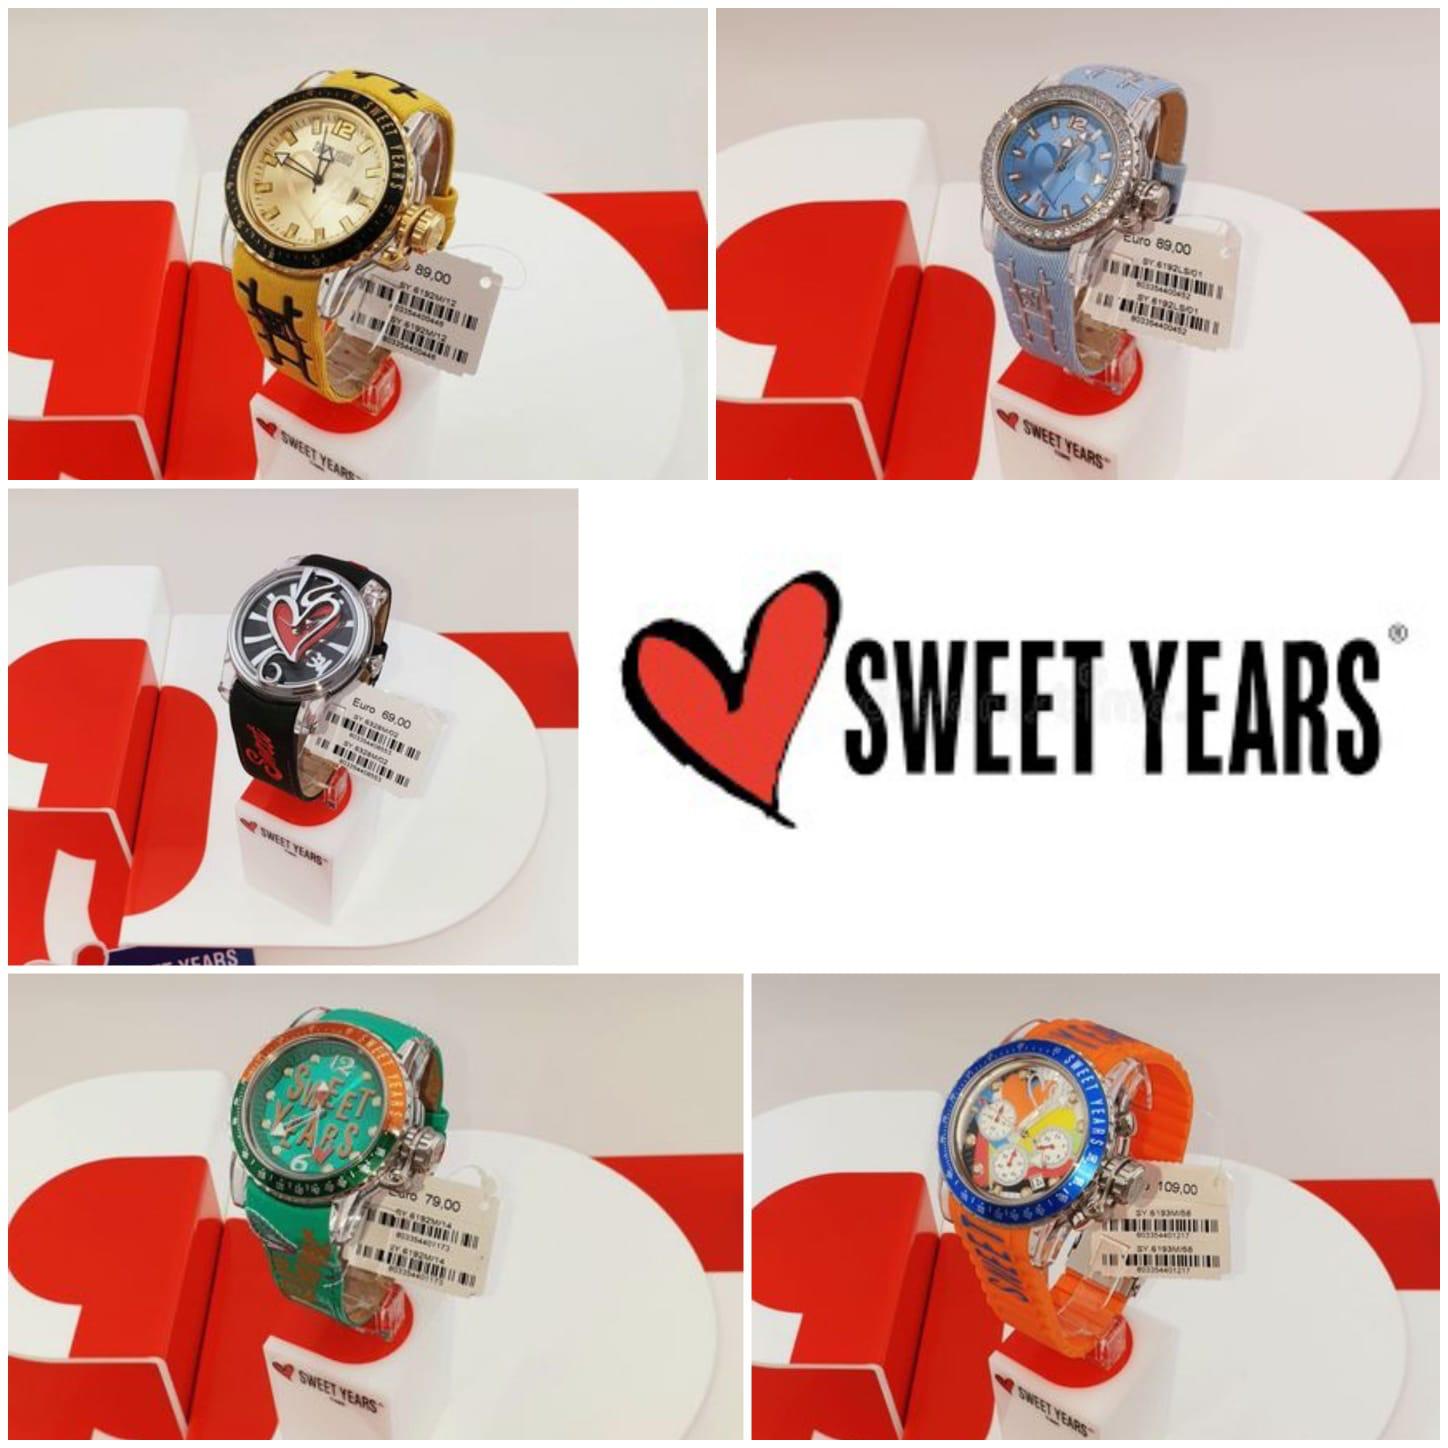 Sweet Years watches mix